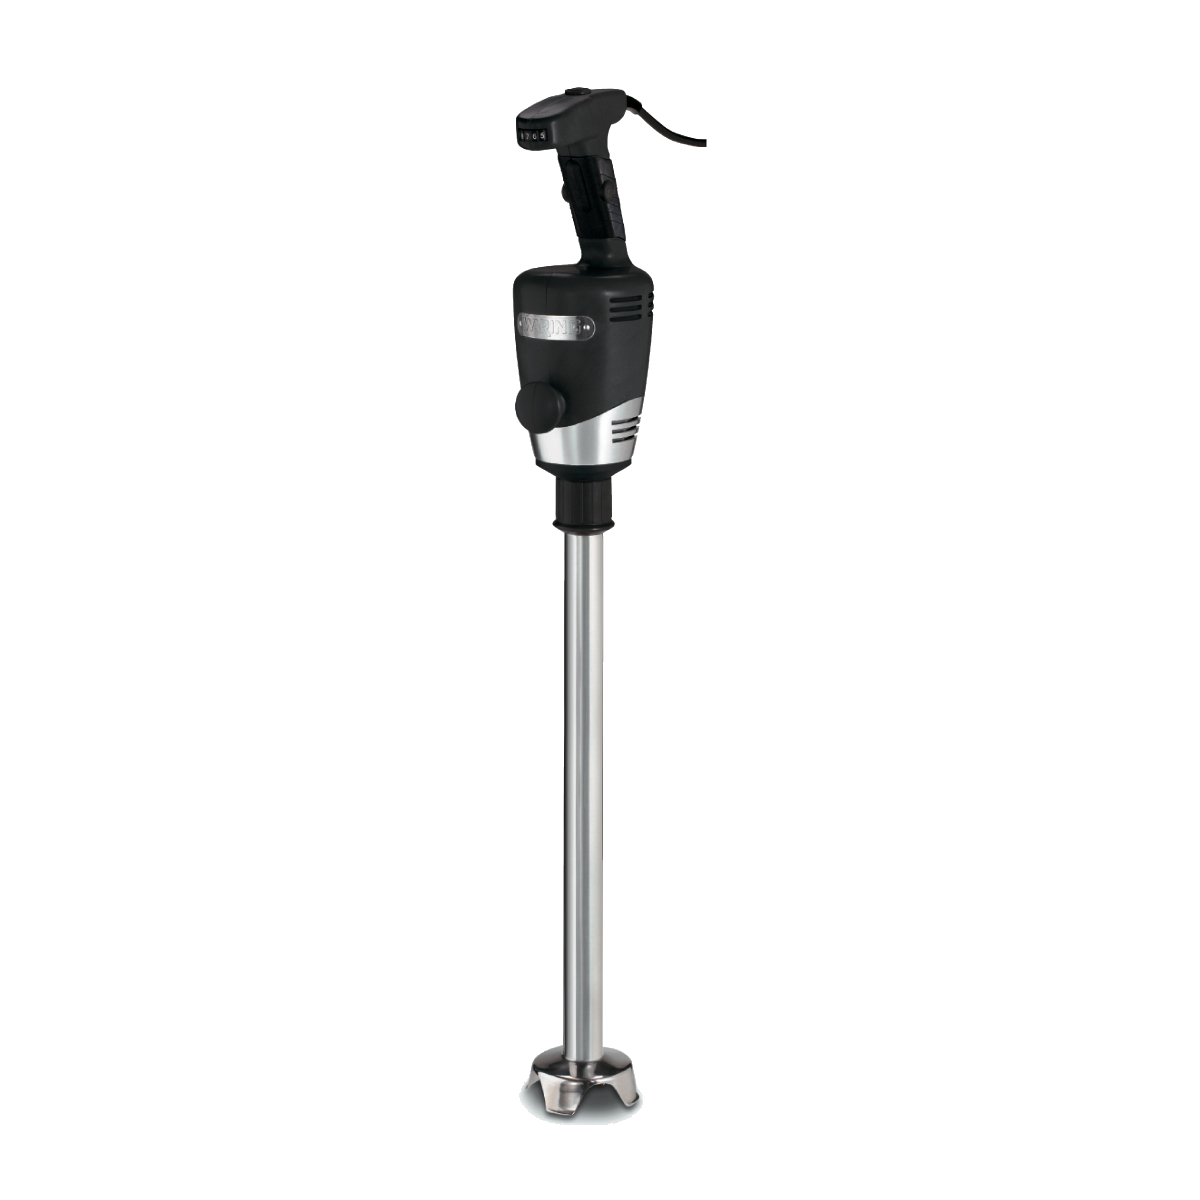 https://www.waringcommercialproducts.com/files/products/wsb70-waring-immersion-blender-main.png